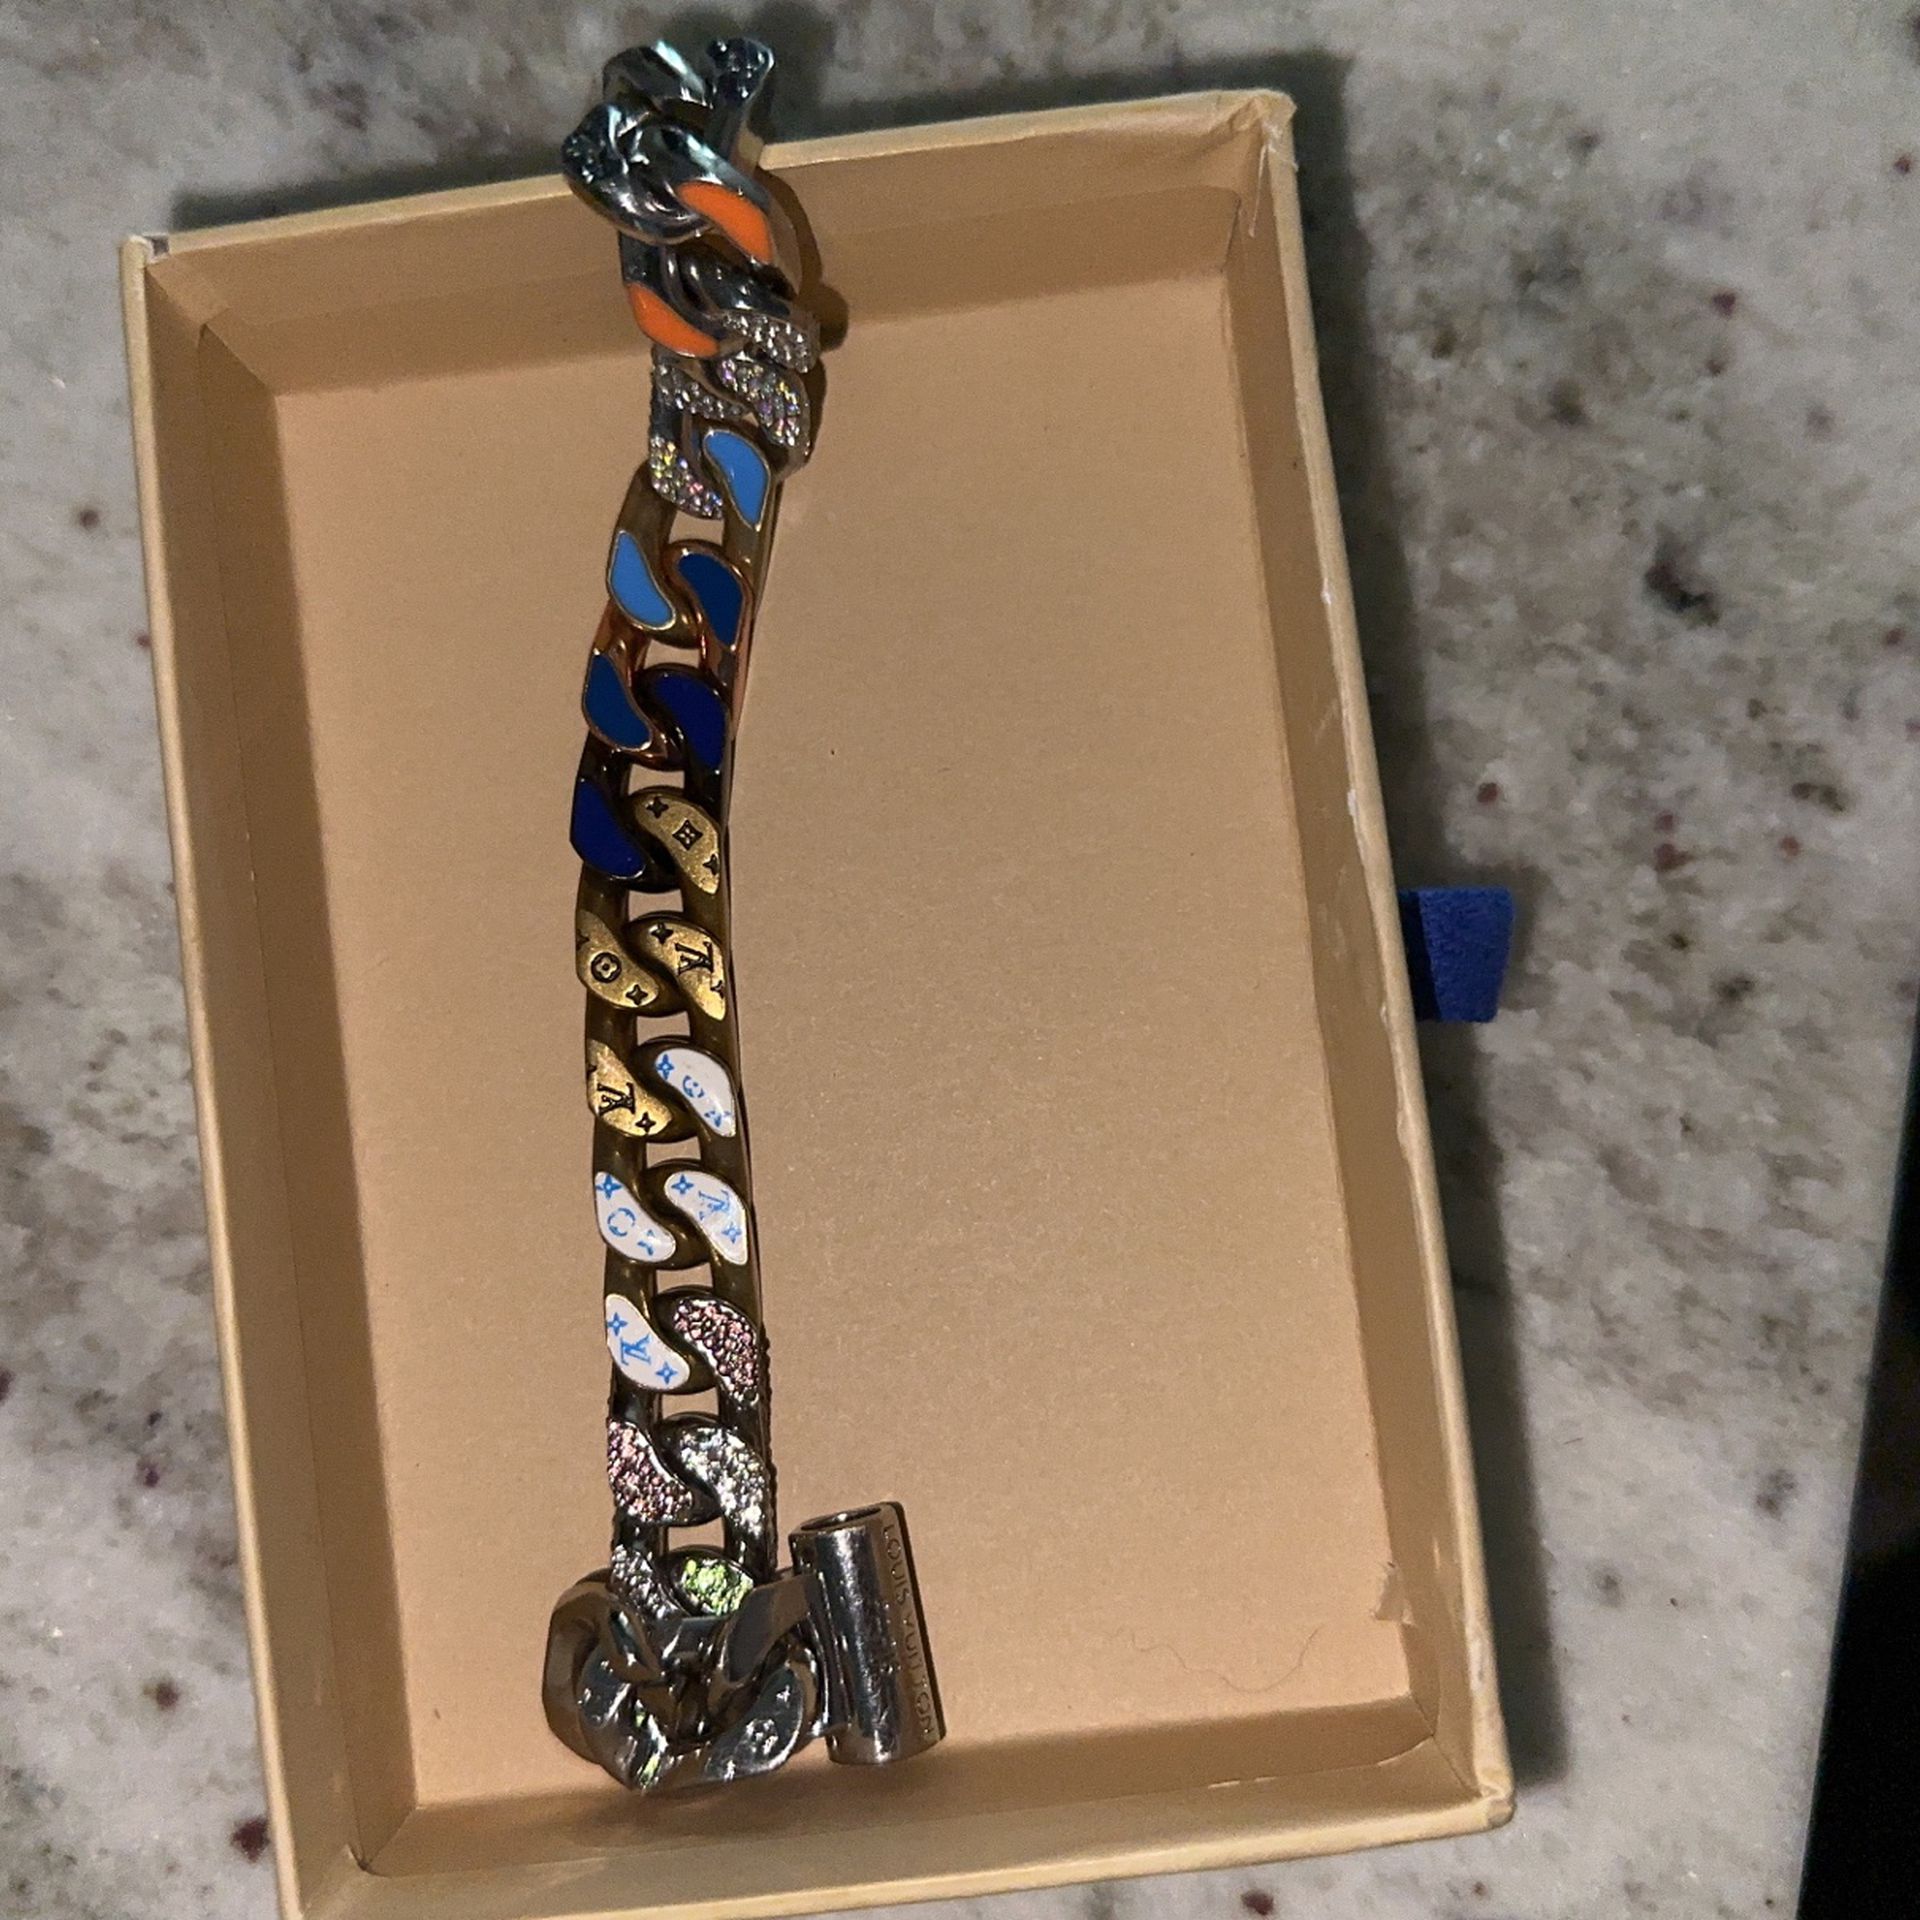 Products By Louis Vuitton: Chain Links Patches Bracelet